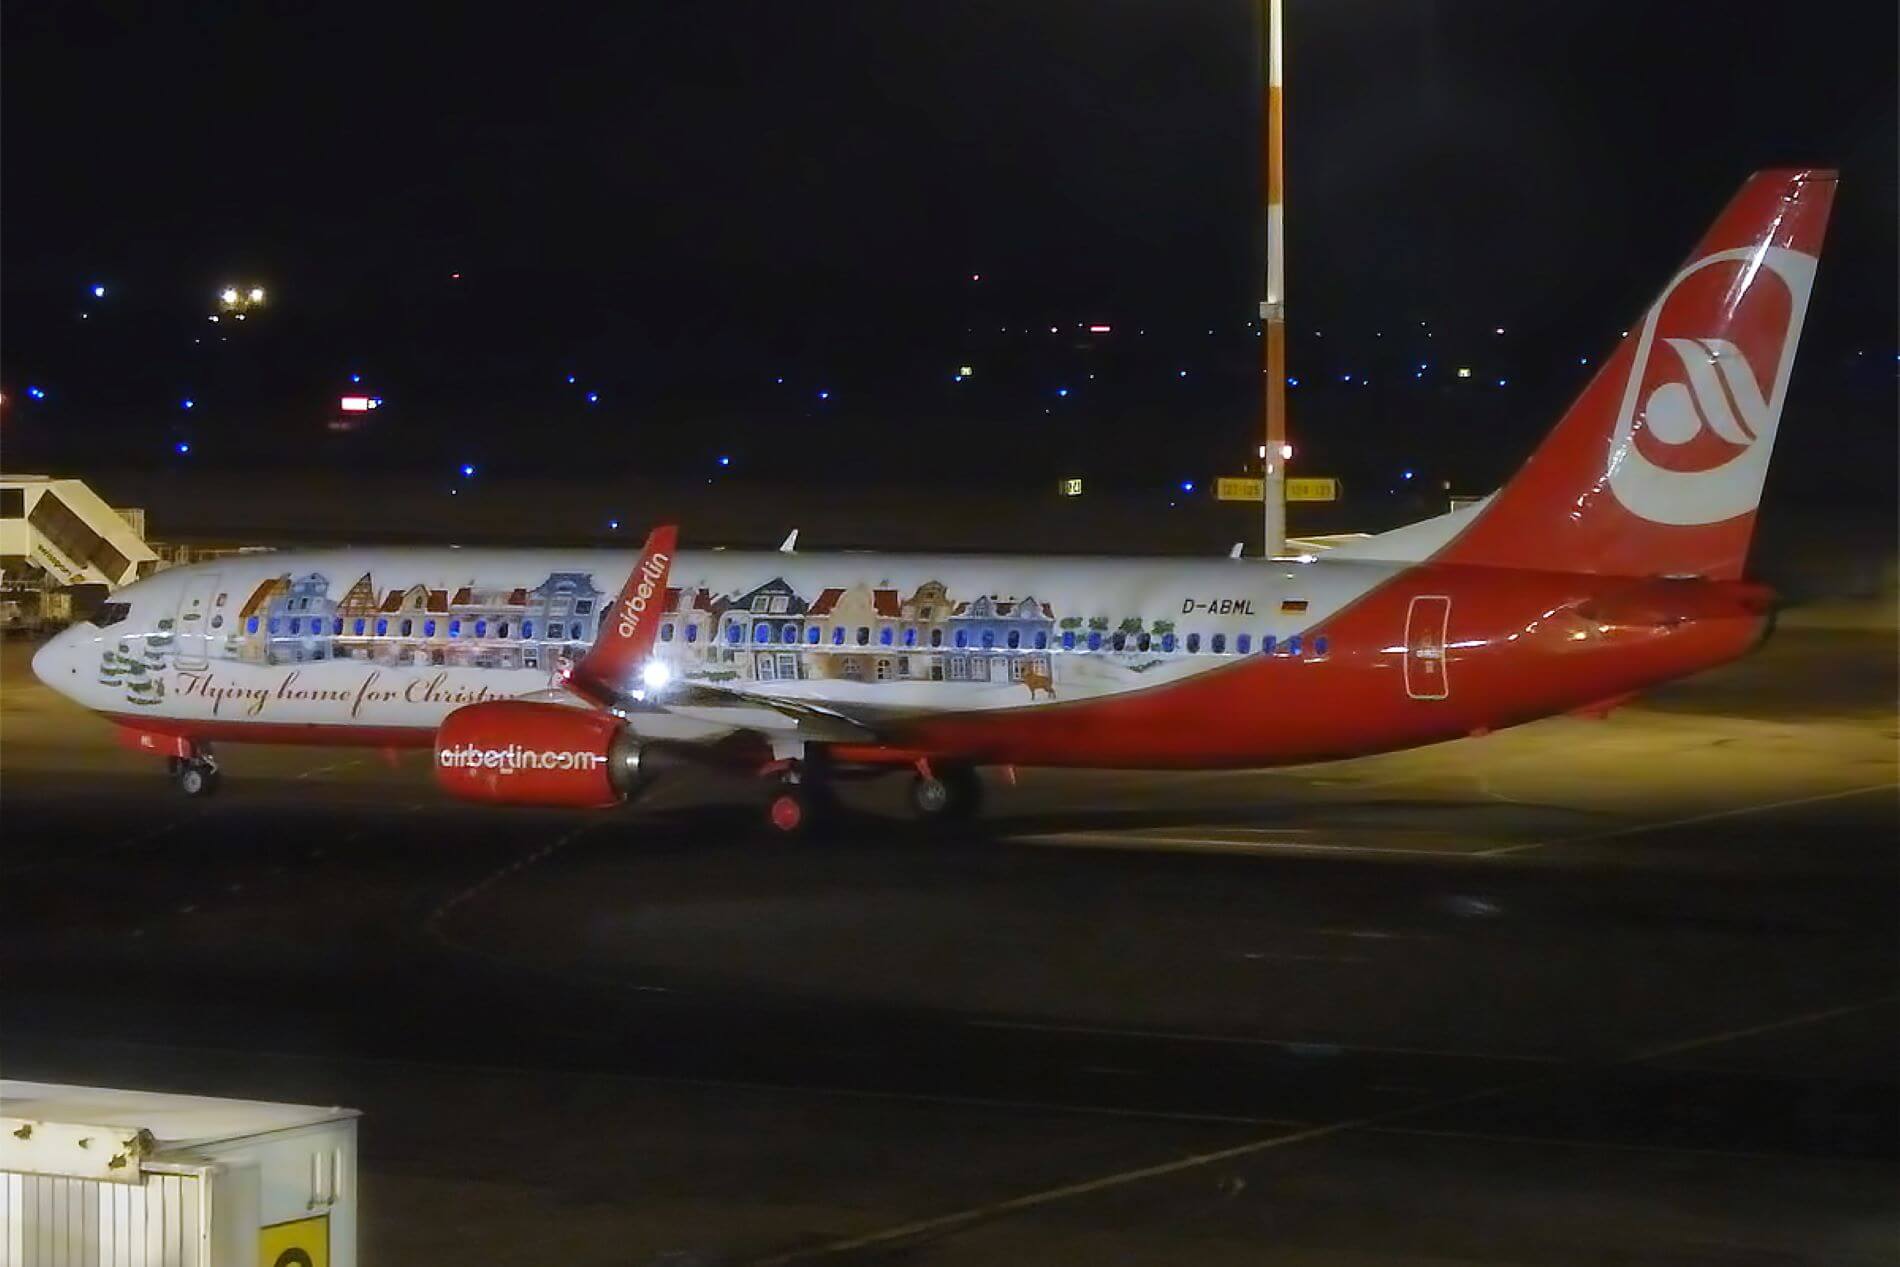 Airberlin Boeing 737 Christmas livery